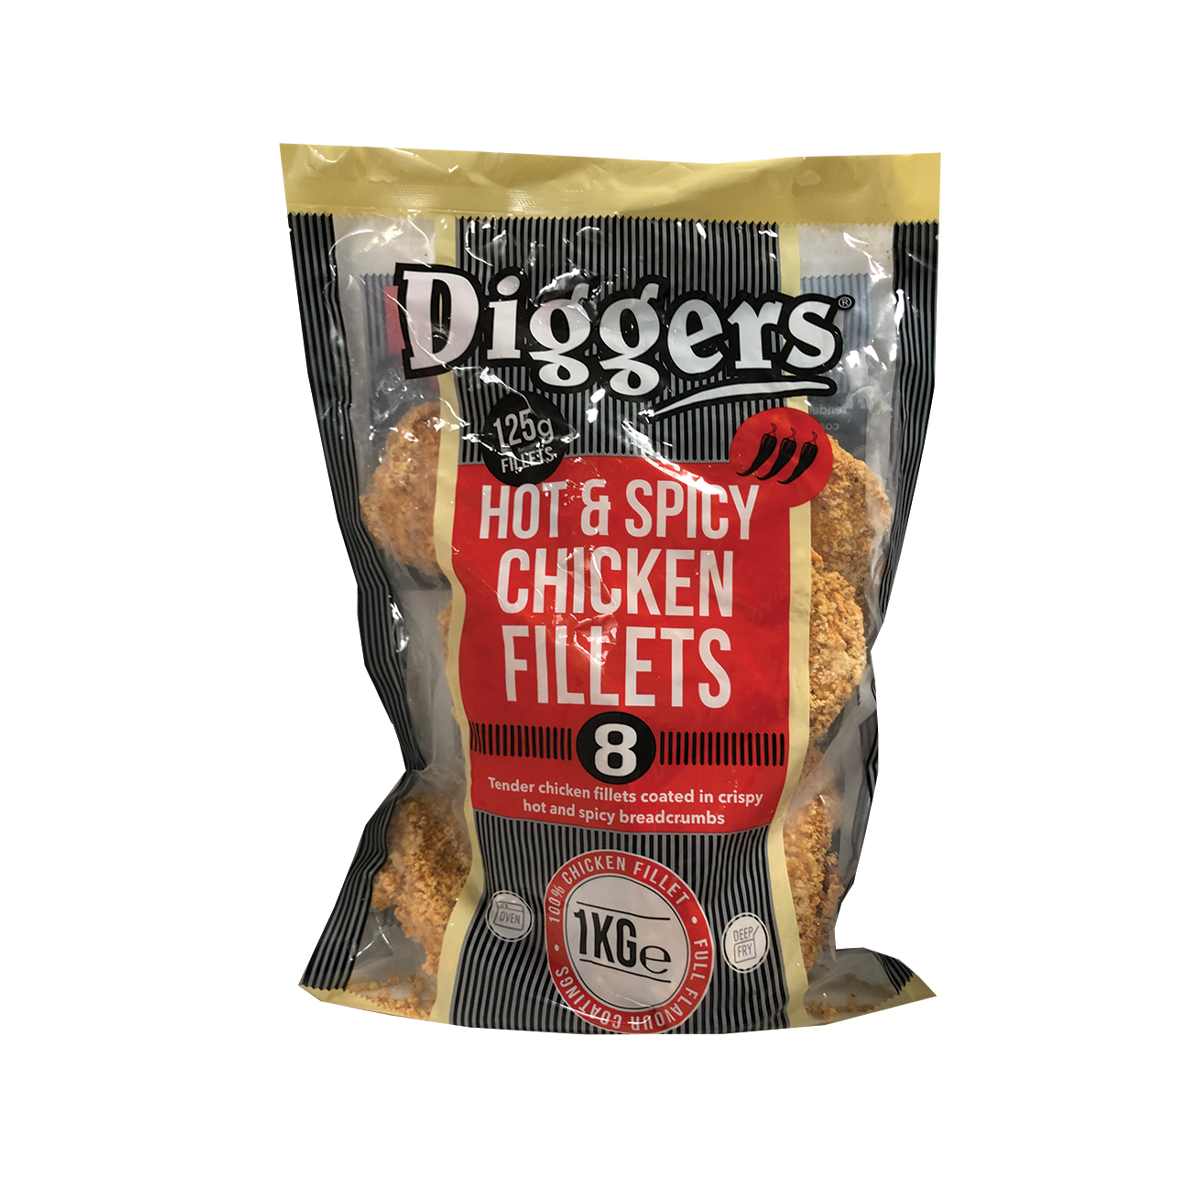 Diggers Hot & Spicy Chicken Fillets